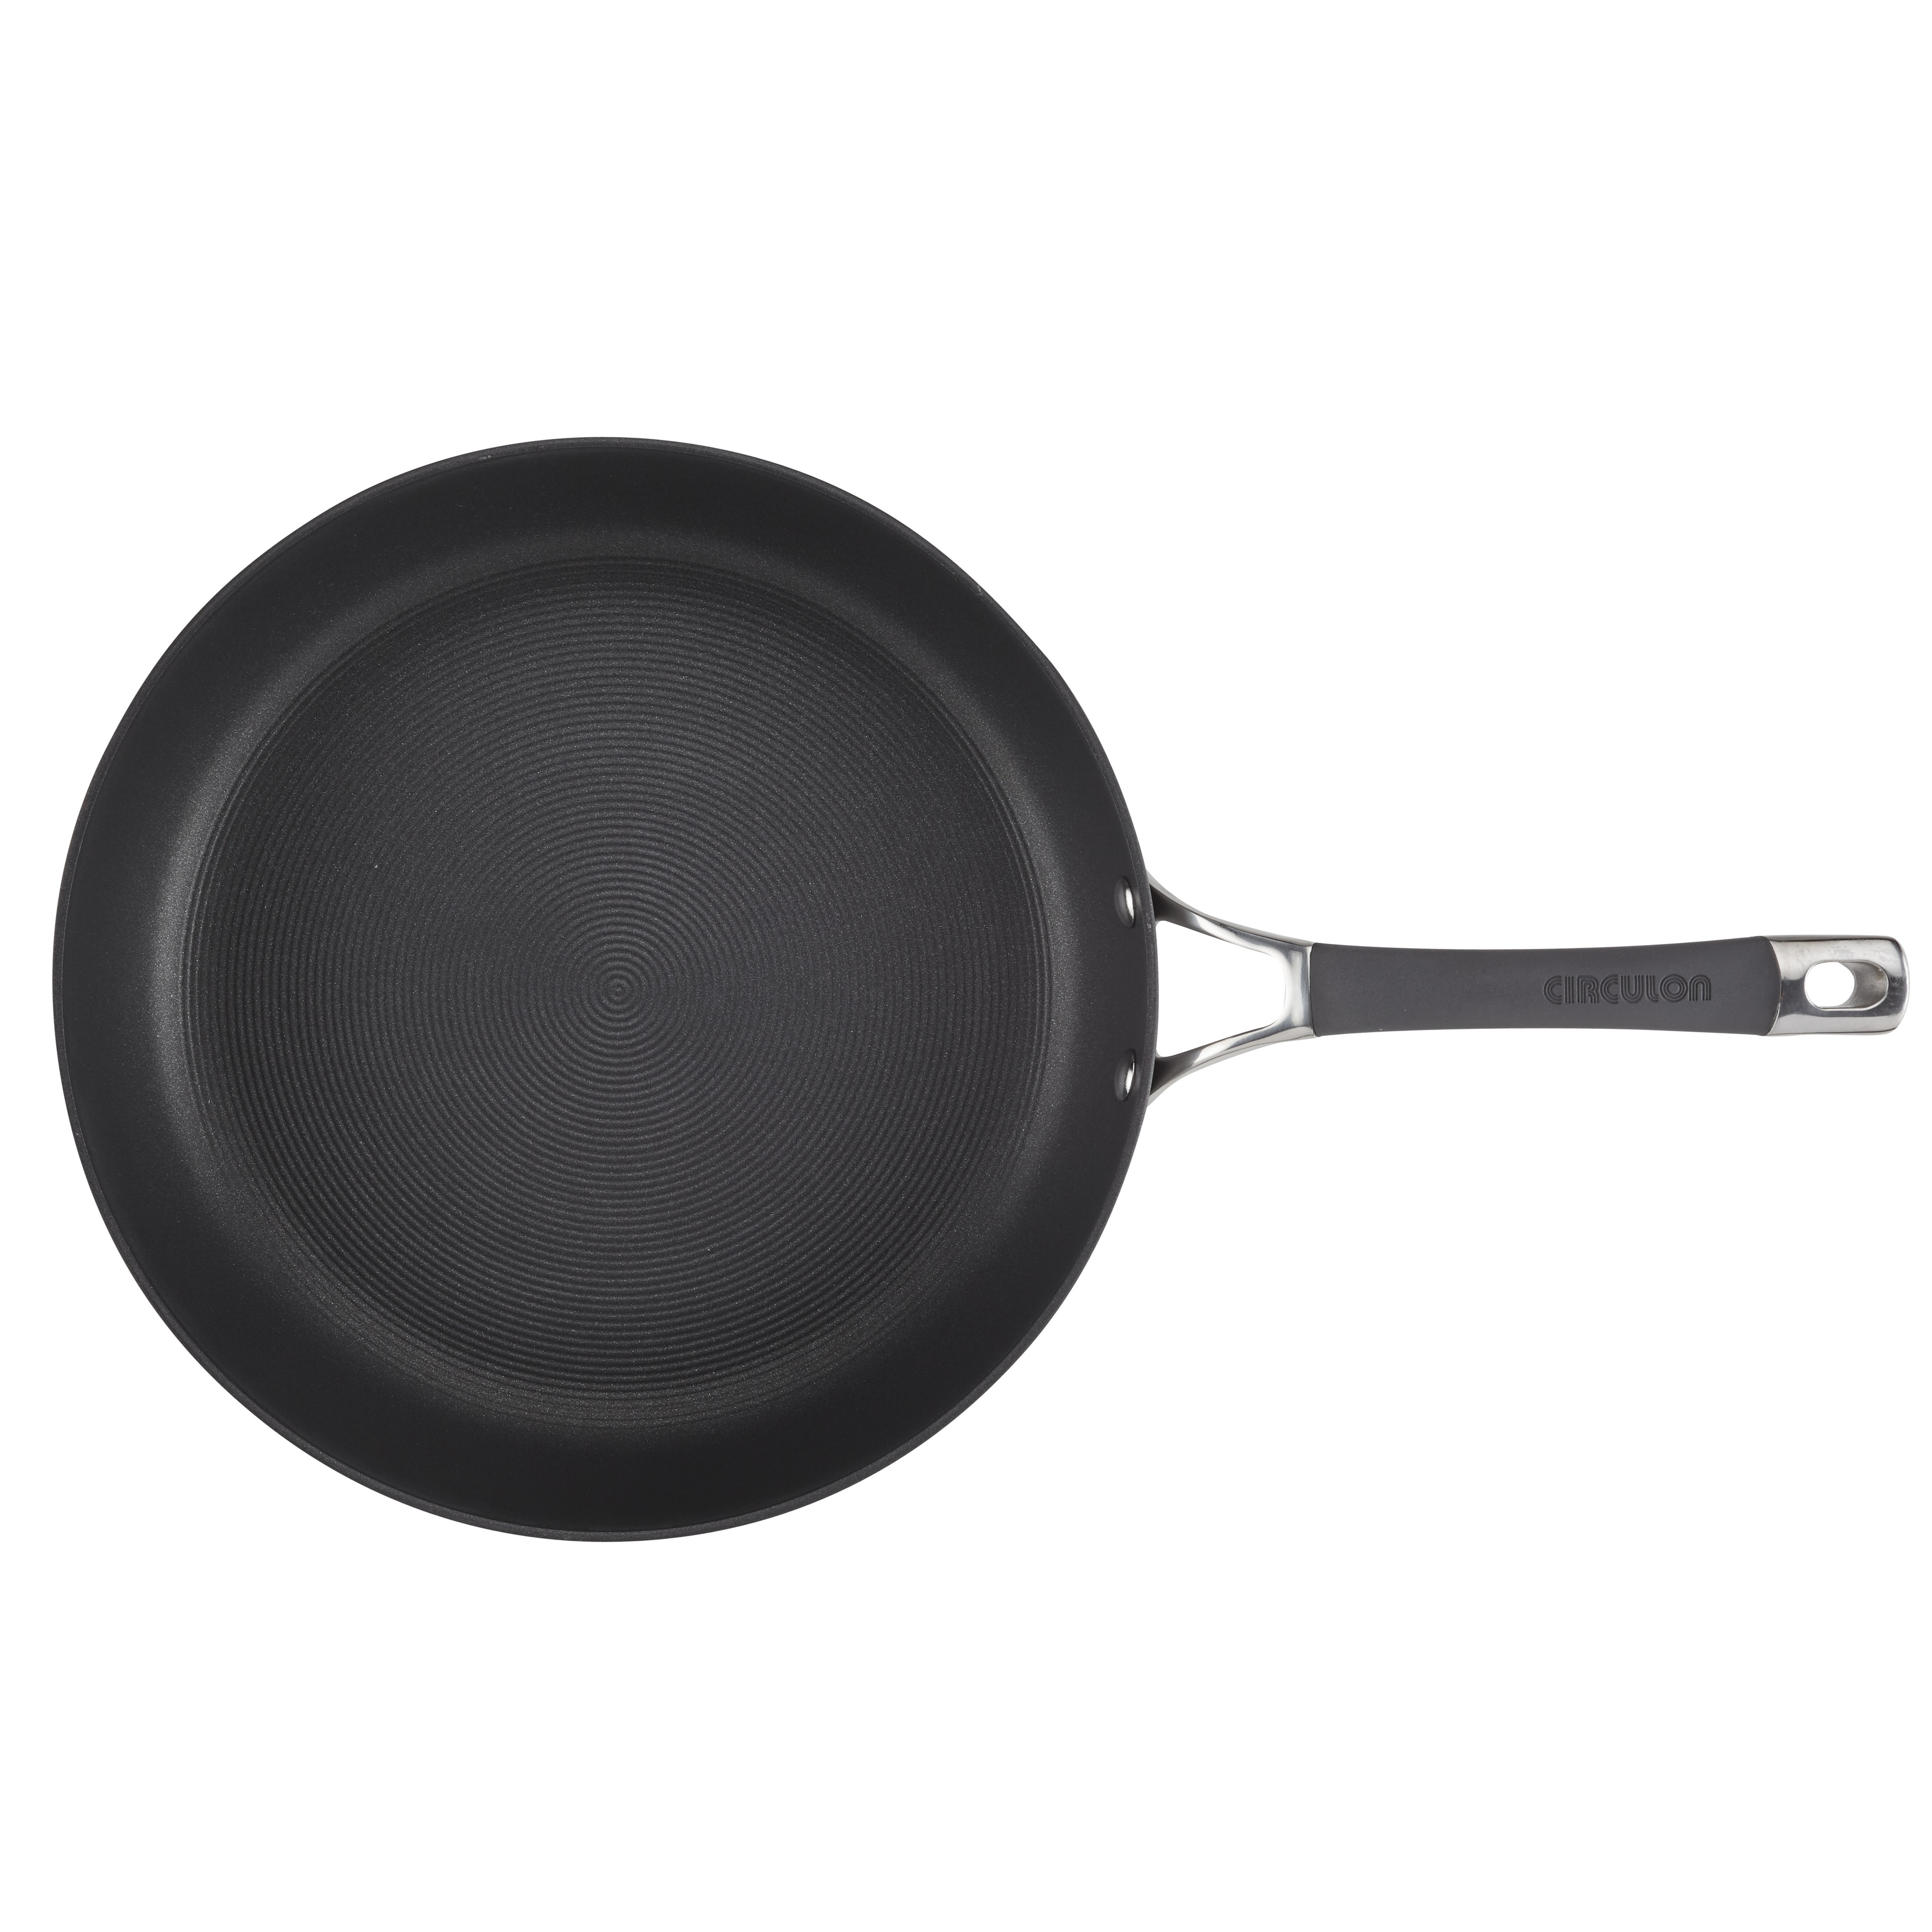 https://ak1.ostkcdn.com/images/products/is/images/direct/16d269fe88170f5664d18a7cab21a8826f792175/Circulon-Radiance-Hard-Anodized-Nonstick-Deep-Frying-Pan-with-Lid%2C-12-Inch%2C-Gray.jpg